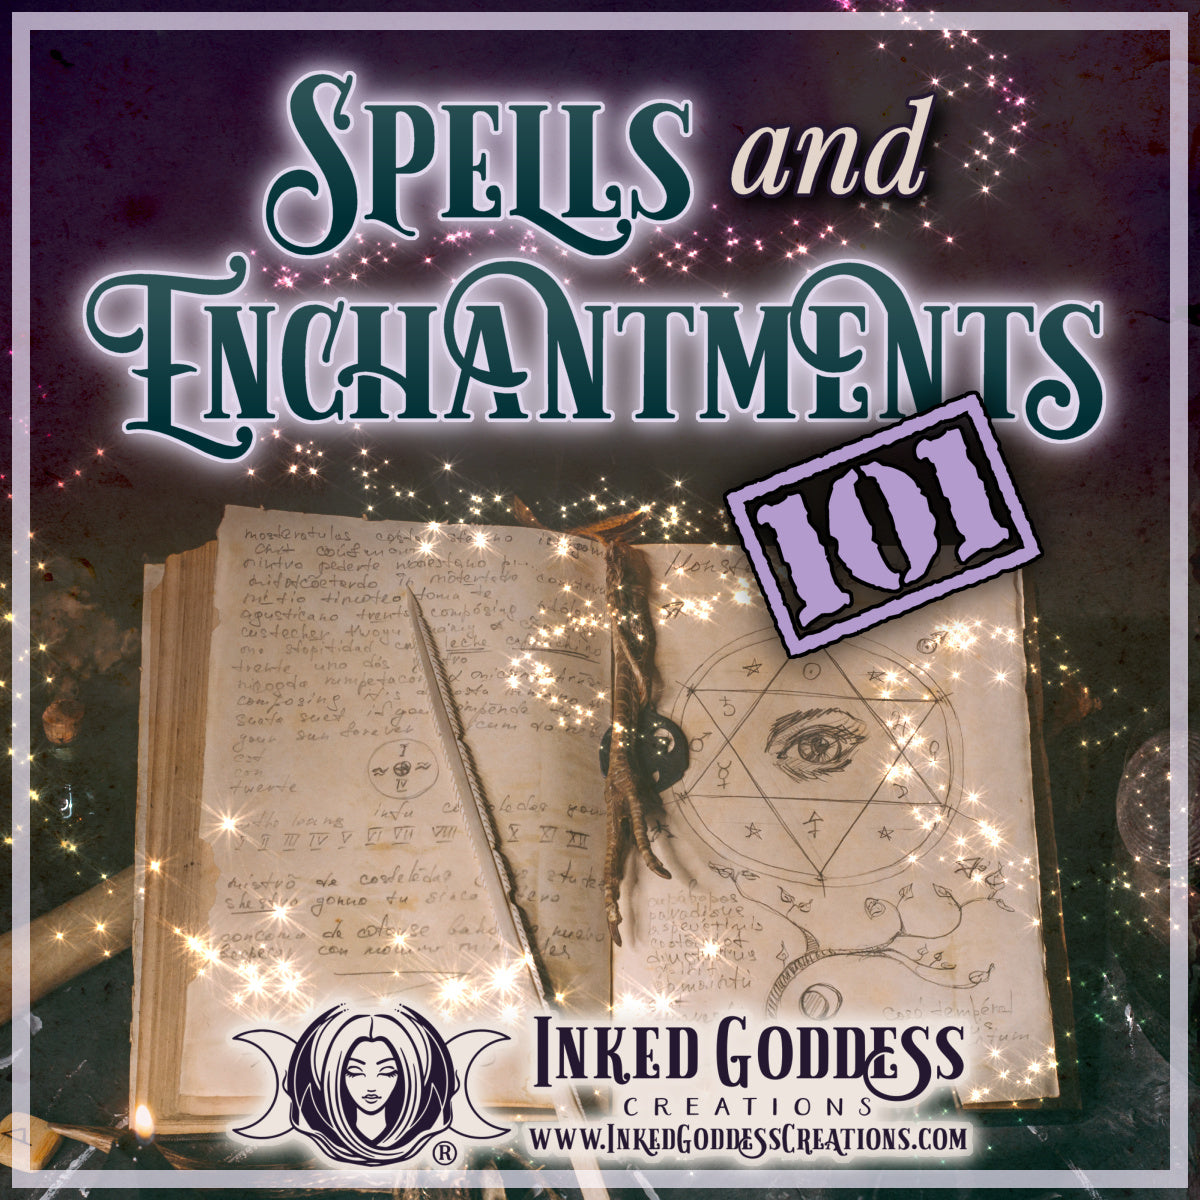 Spells and Enchantments 101